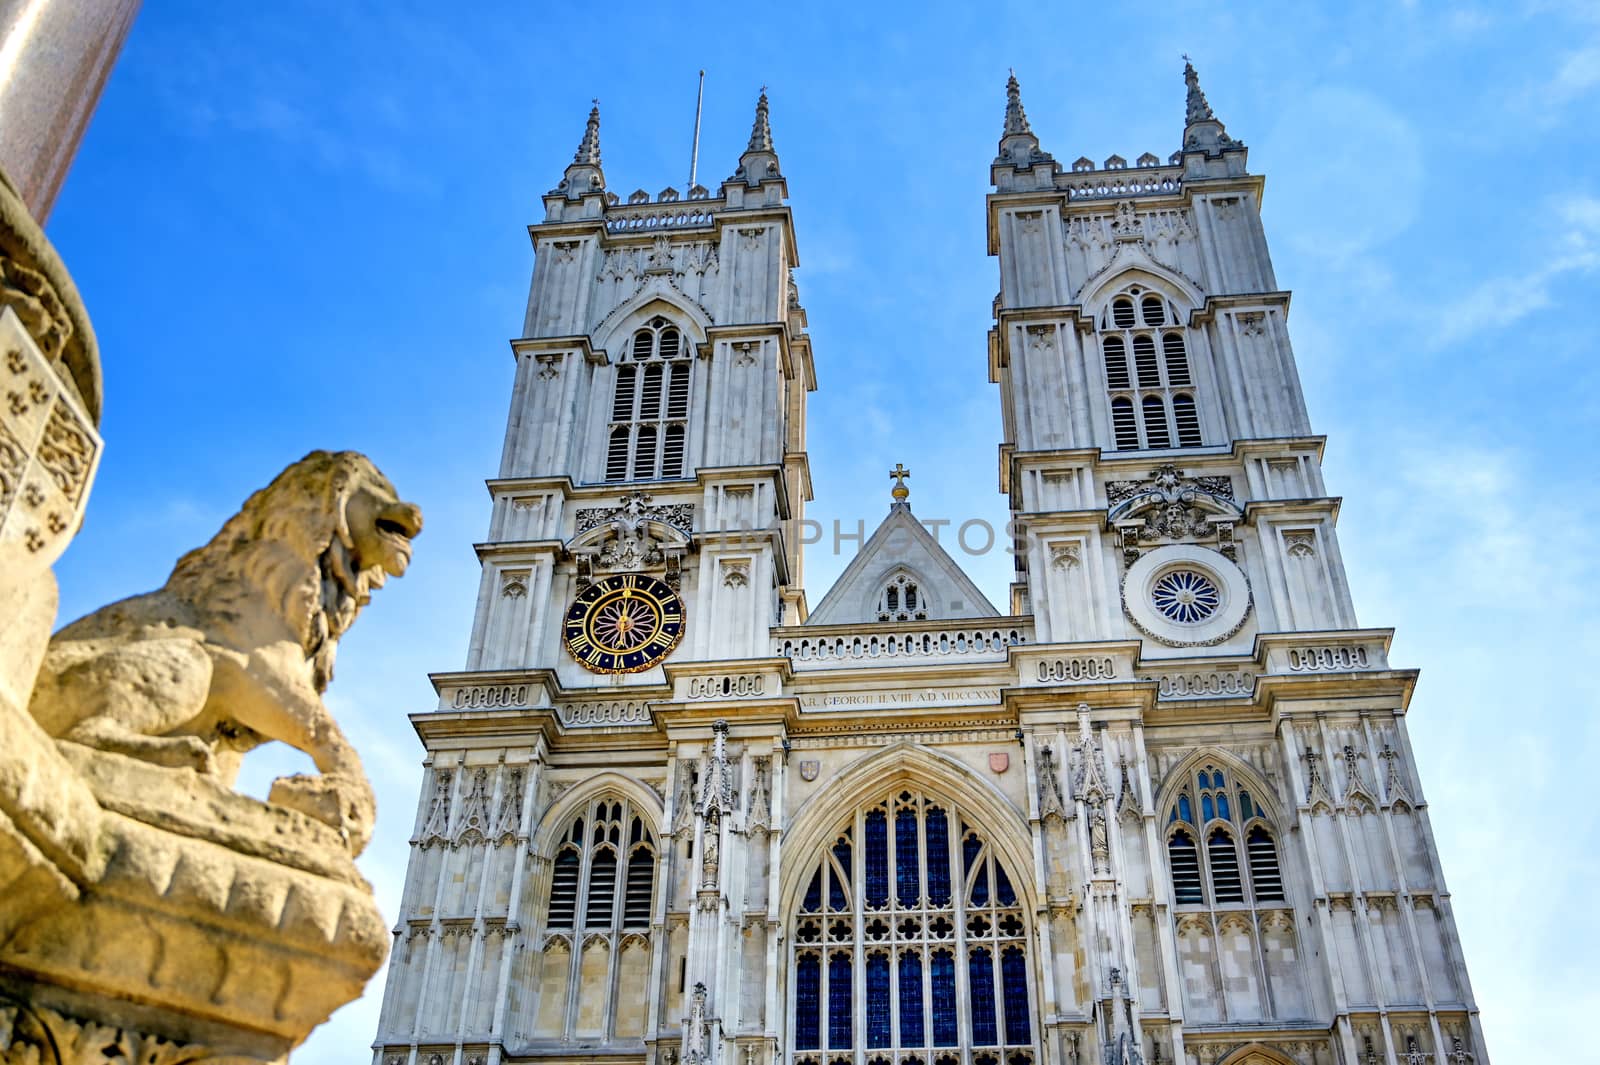 A view of Westminster Abbey on a sunny day in London, UK.